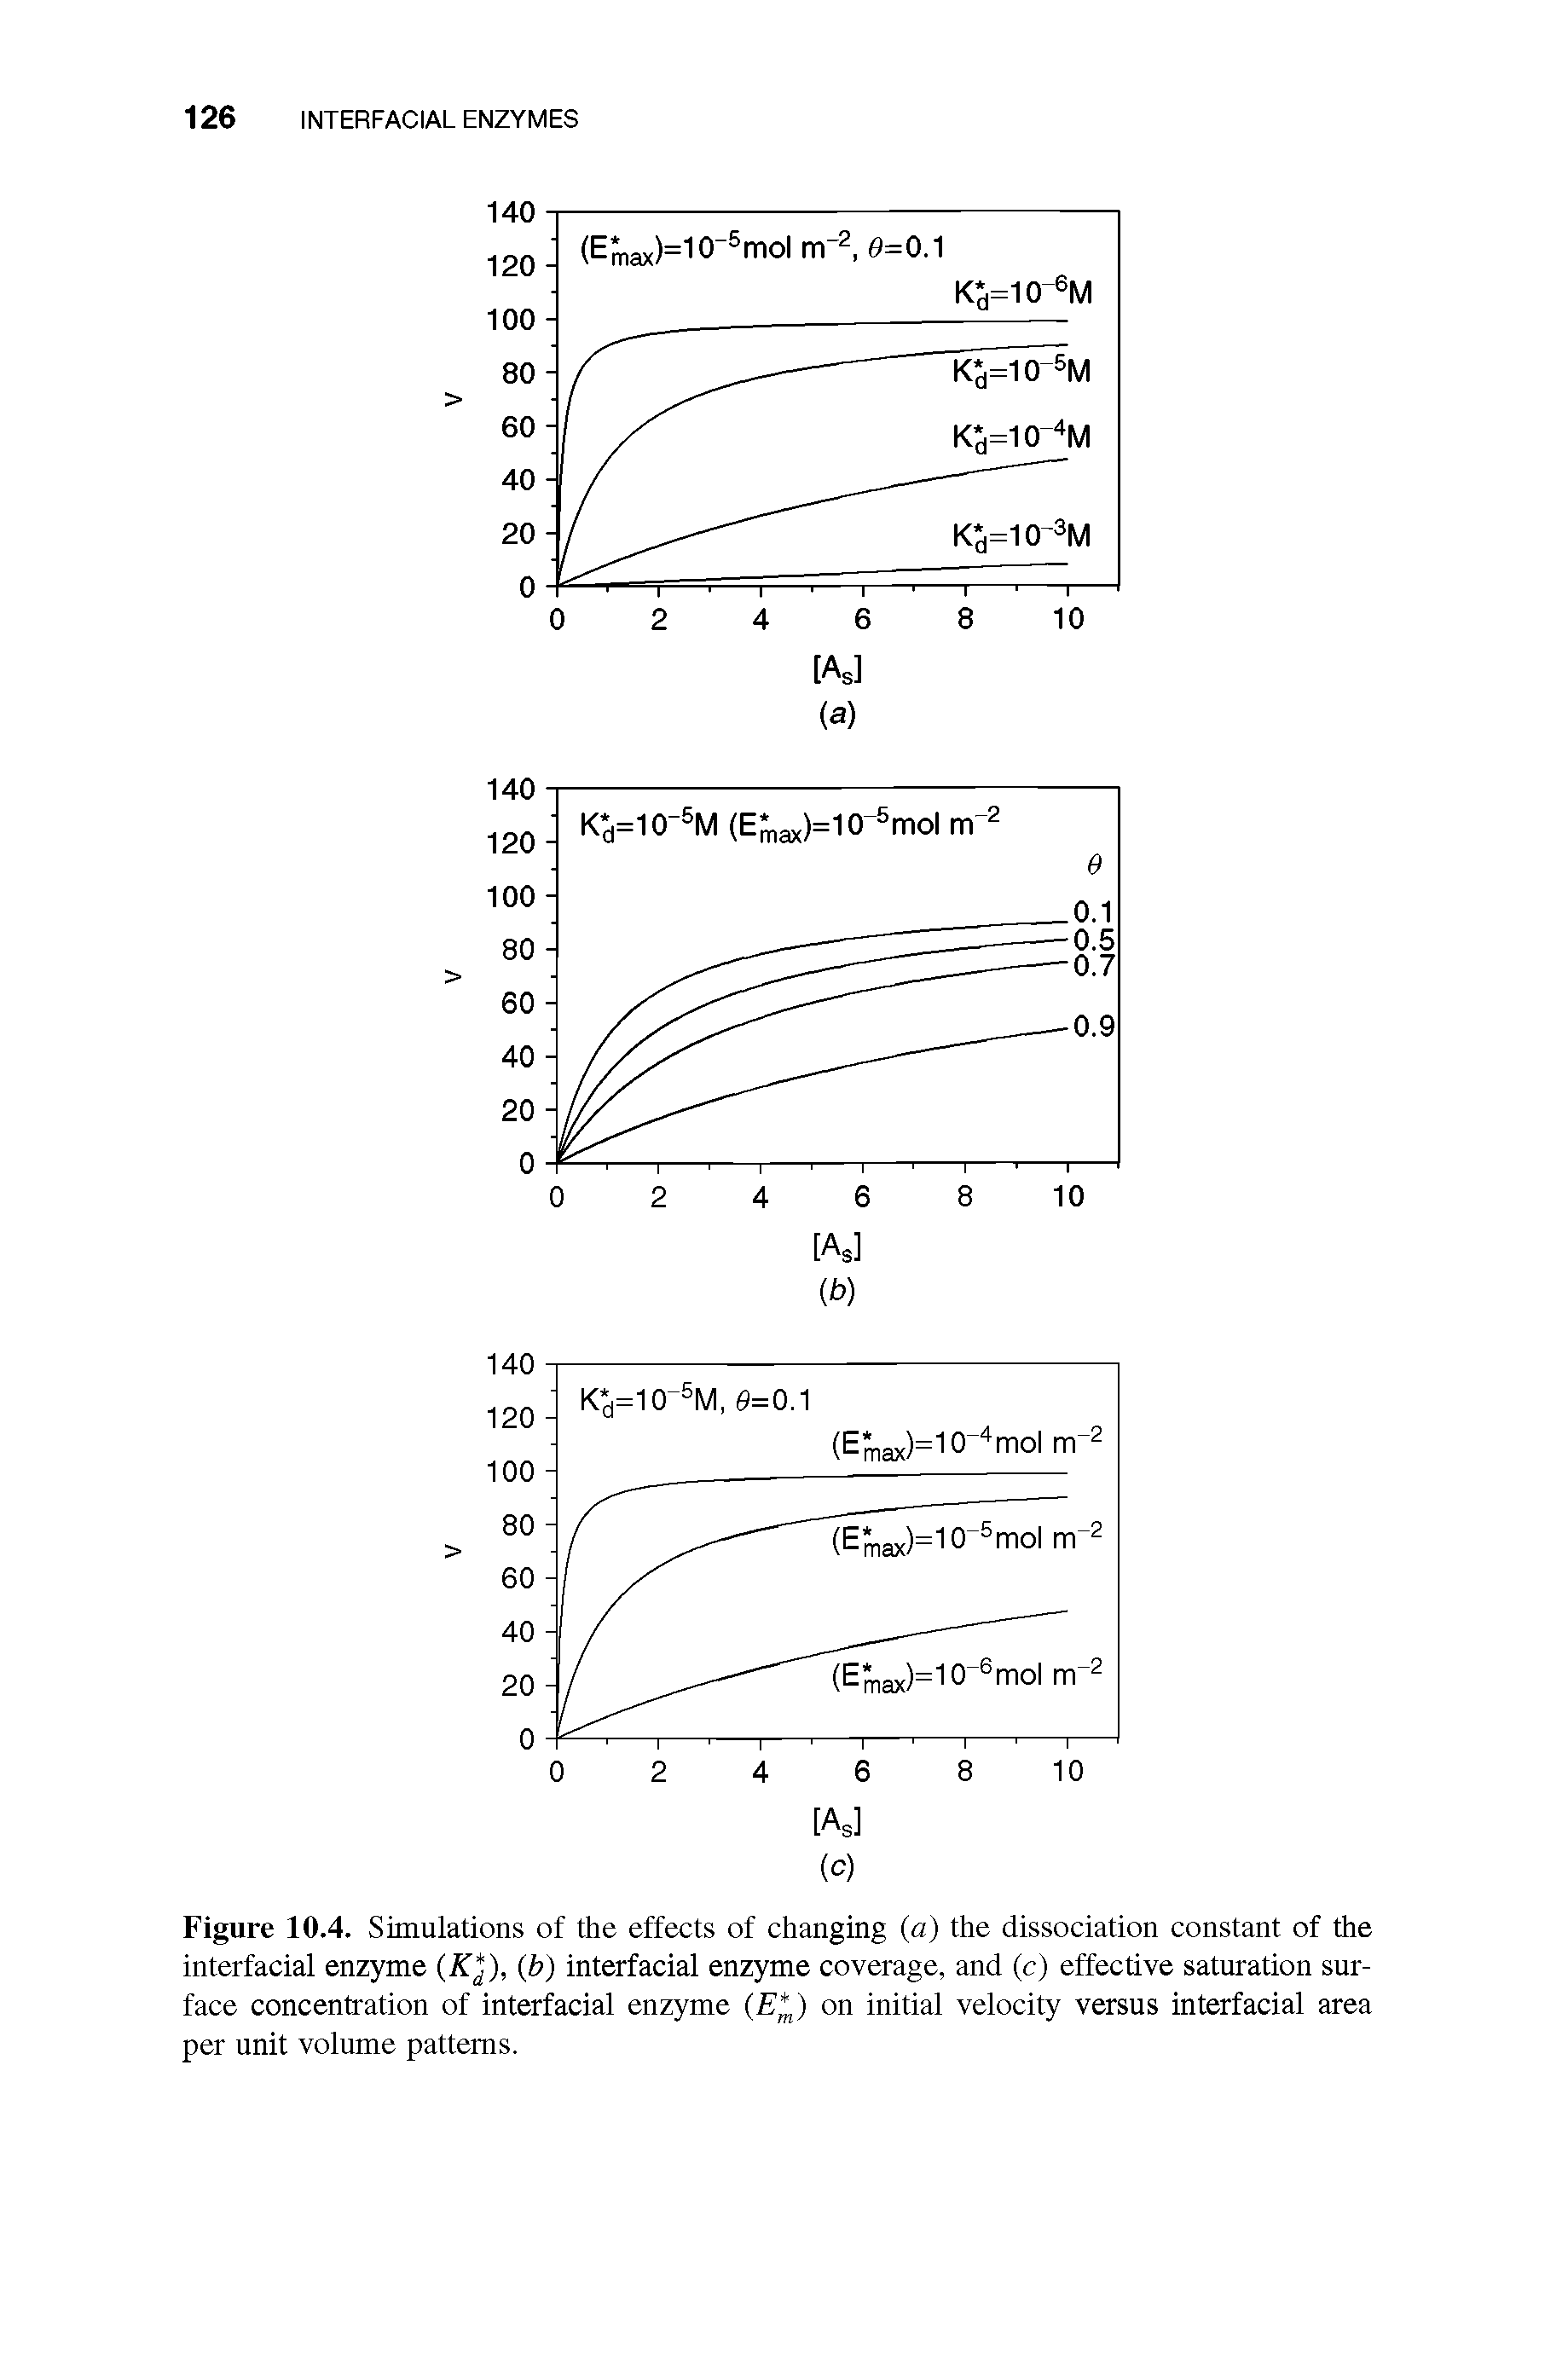 Figure 10.4. Simulations of the effects of changing (a) the dissociation constant of the interfacial enzyme (Kj), (b) interfacial enzyme coverage, and (c) effective saturation surface concentration of interfacial enzyme (E ) on initial velocity versus interfacial area per unit volume patterns.